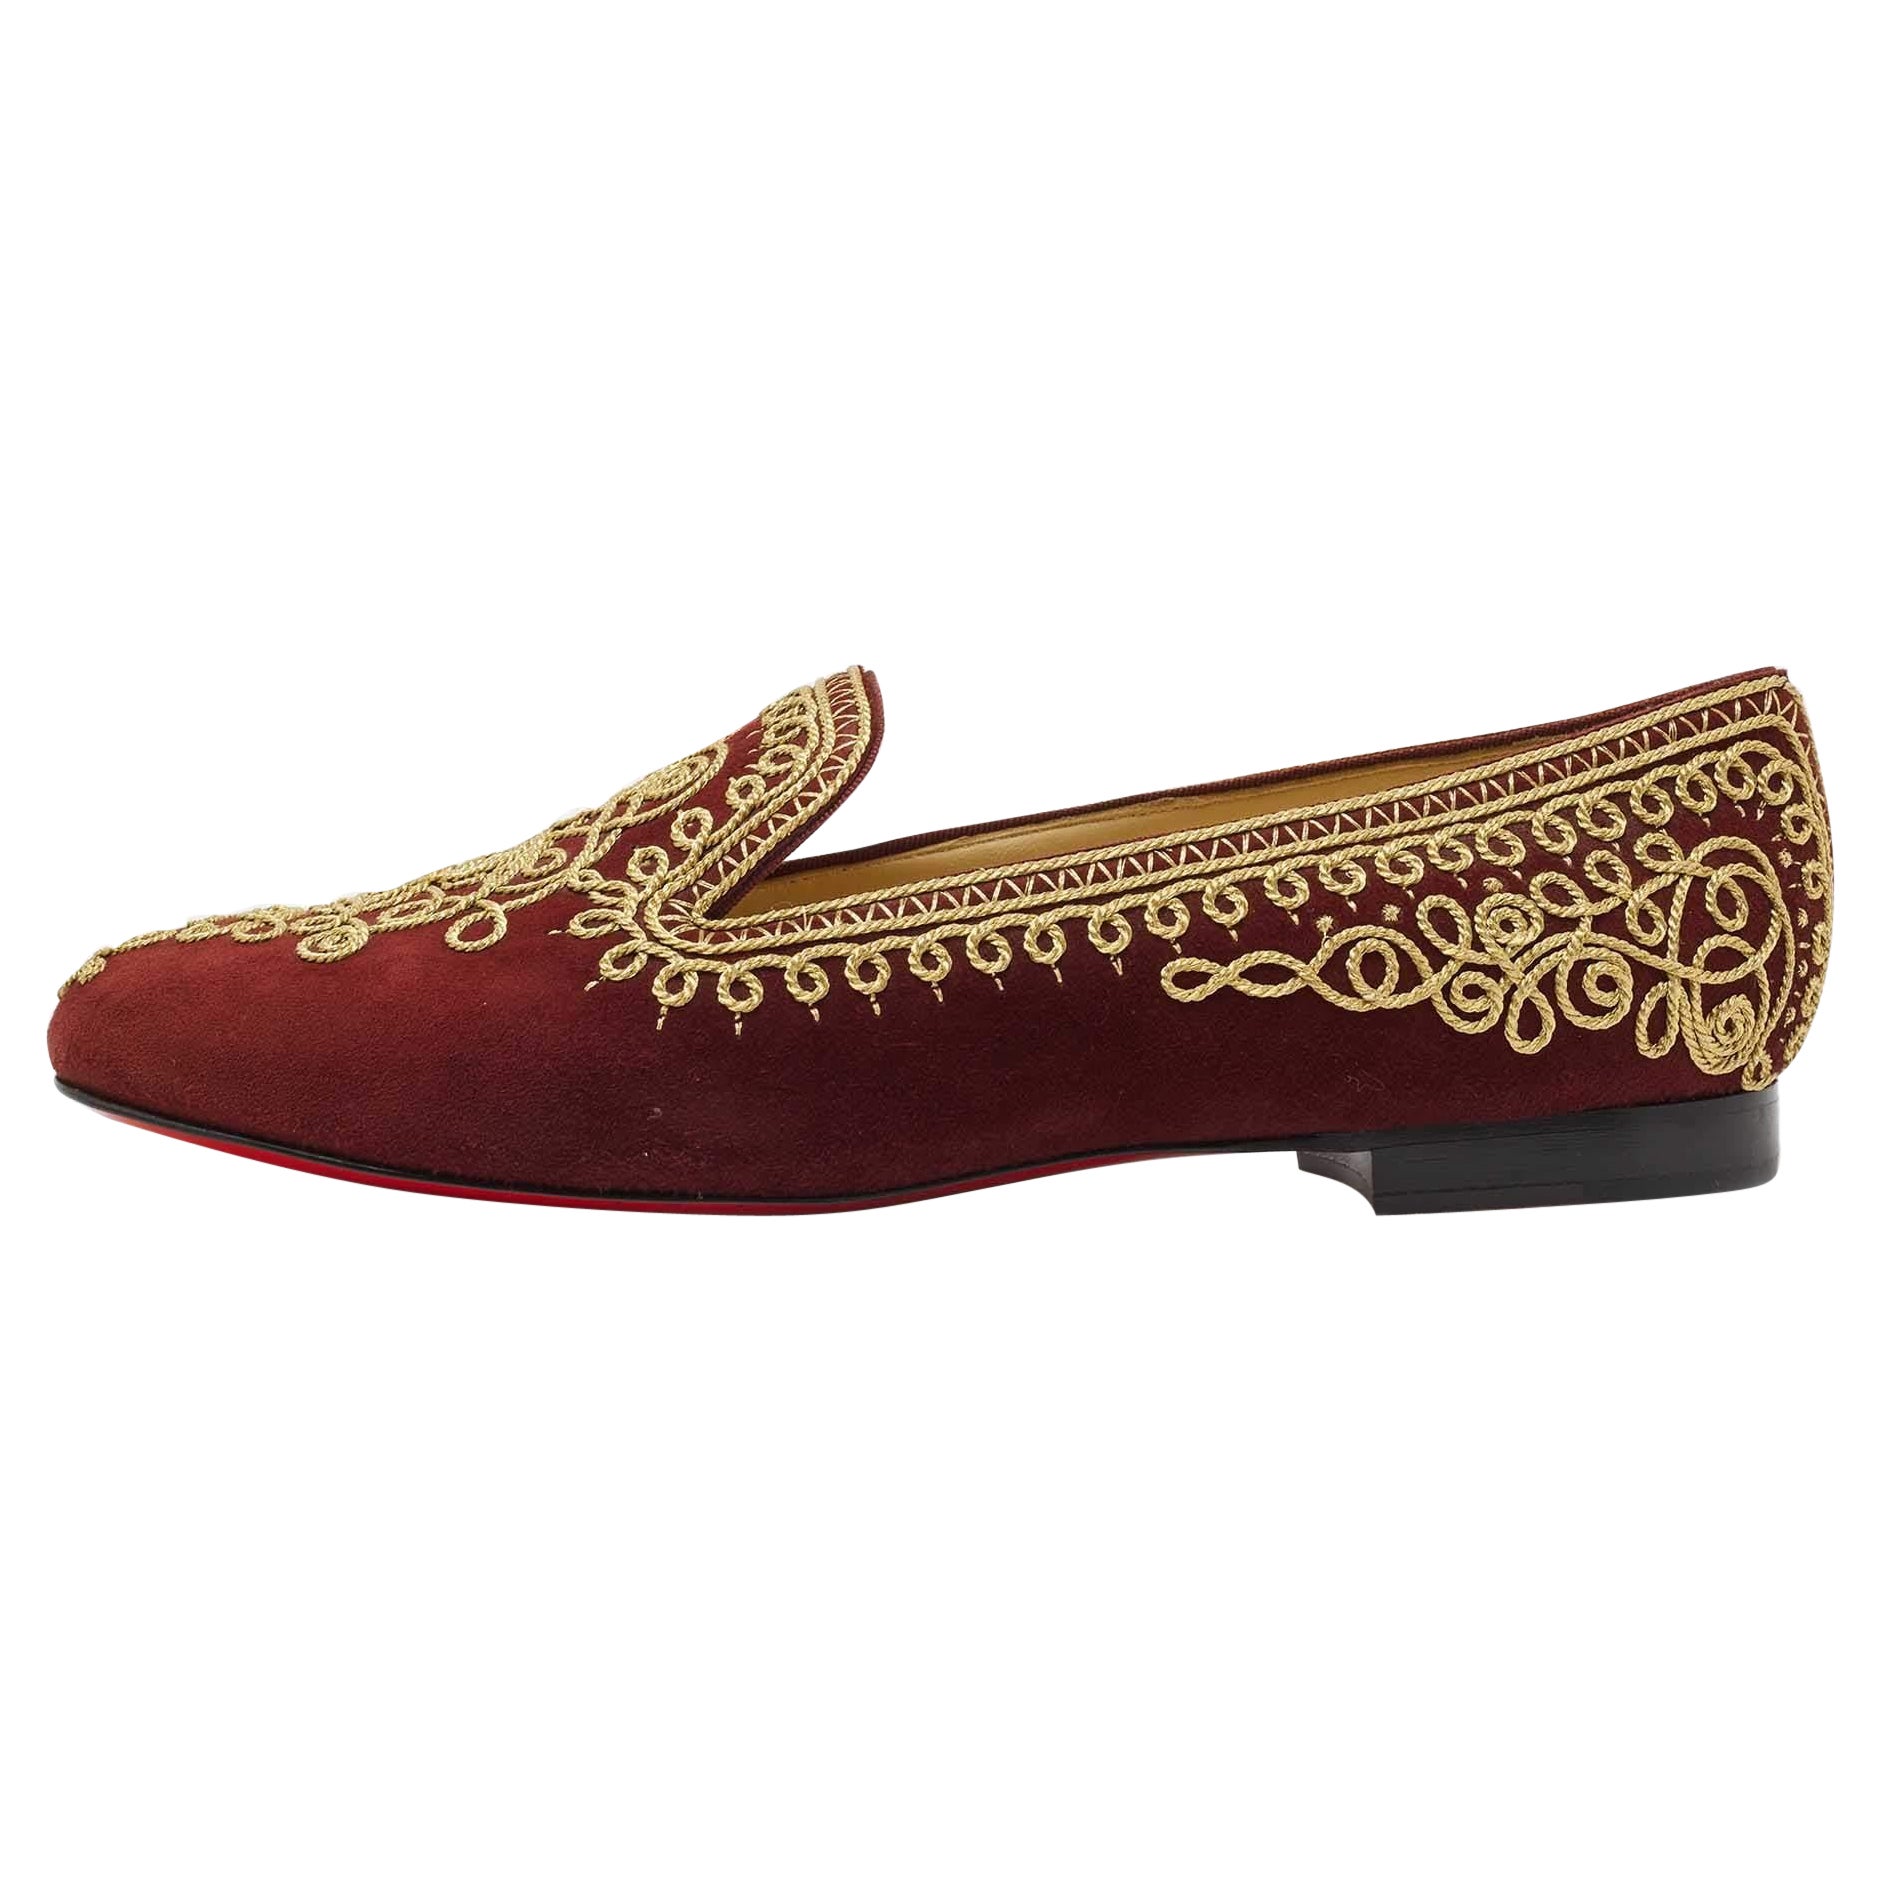 Christian Louboutin Burgundy Embroidered Mamounia Smoking Slippers Size 40.5 For Sale